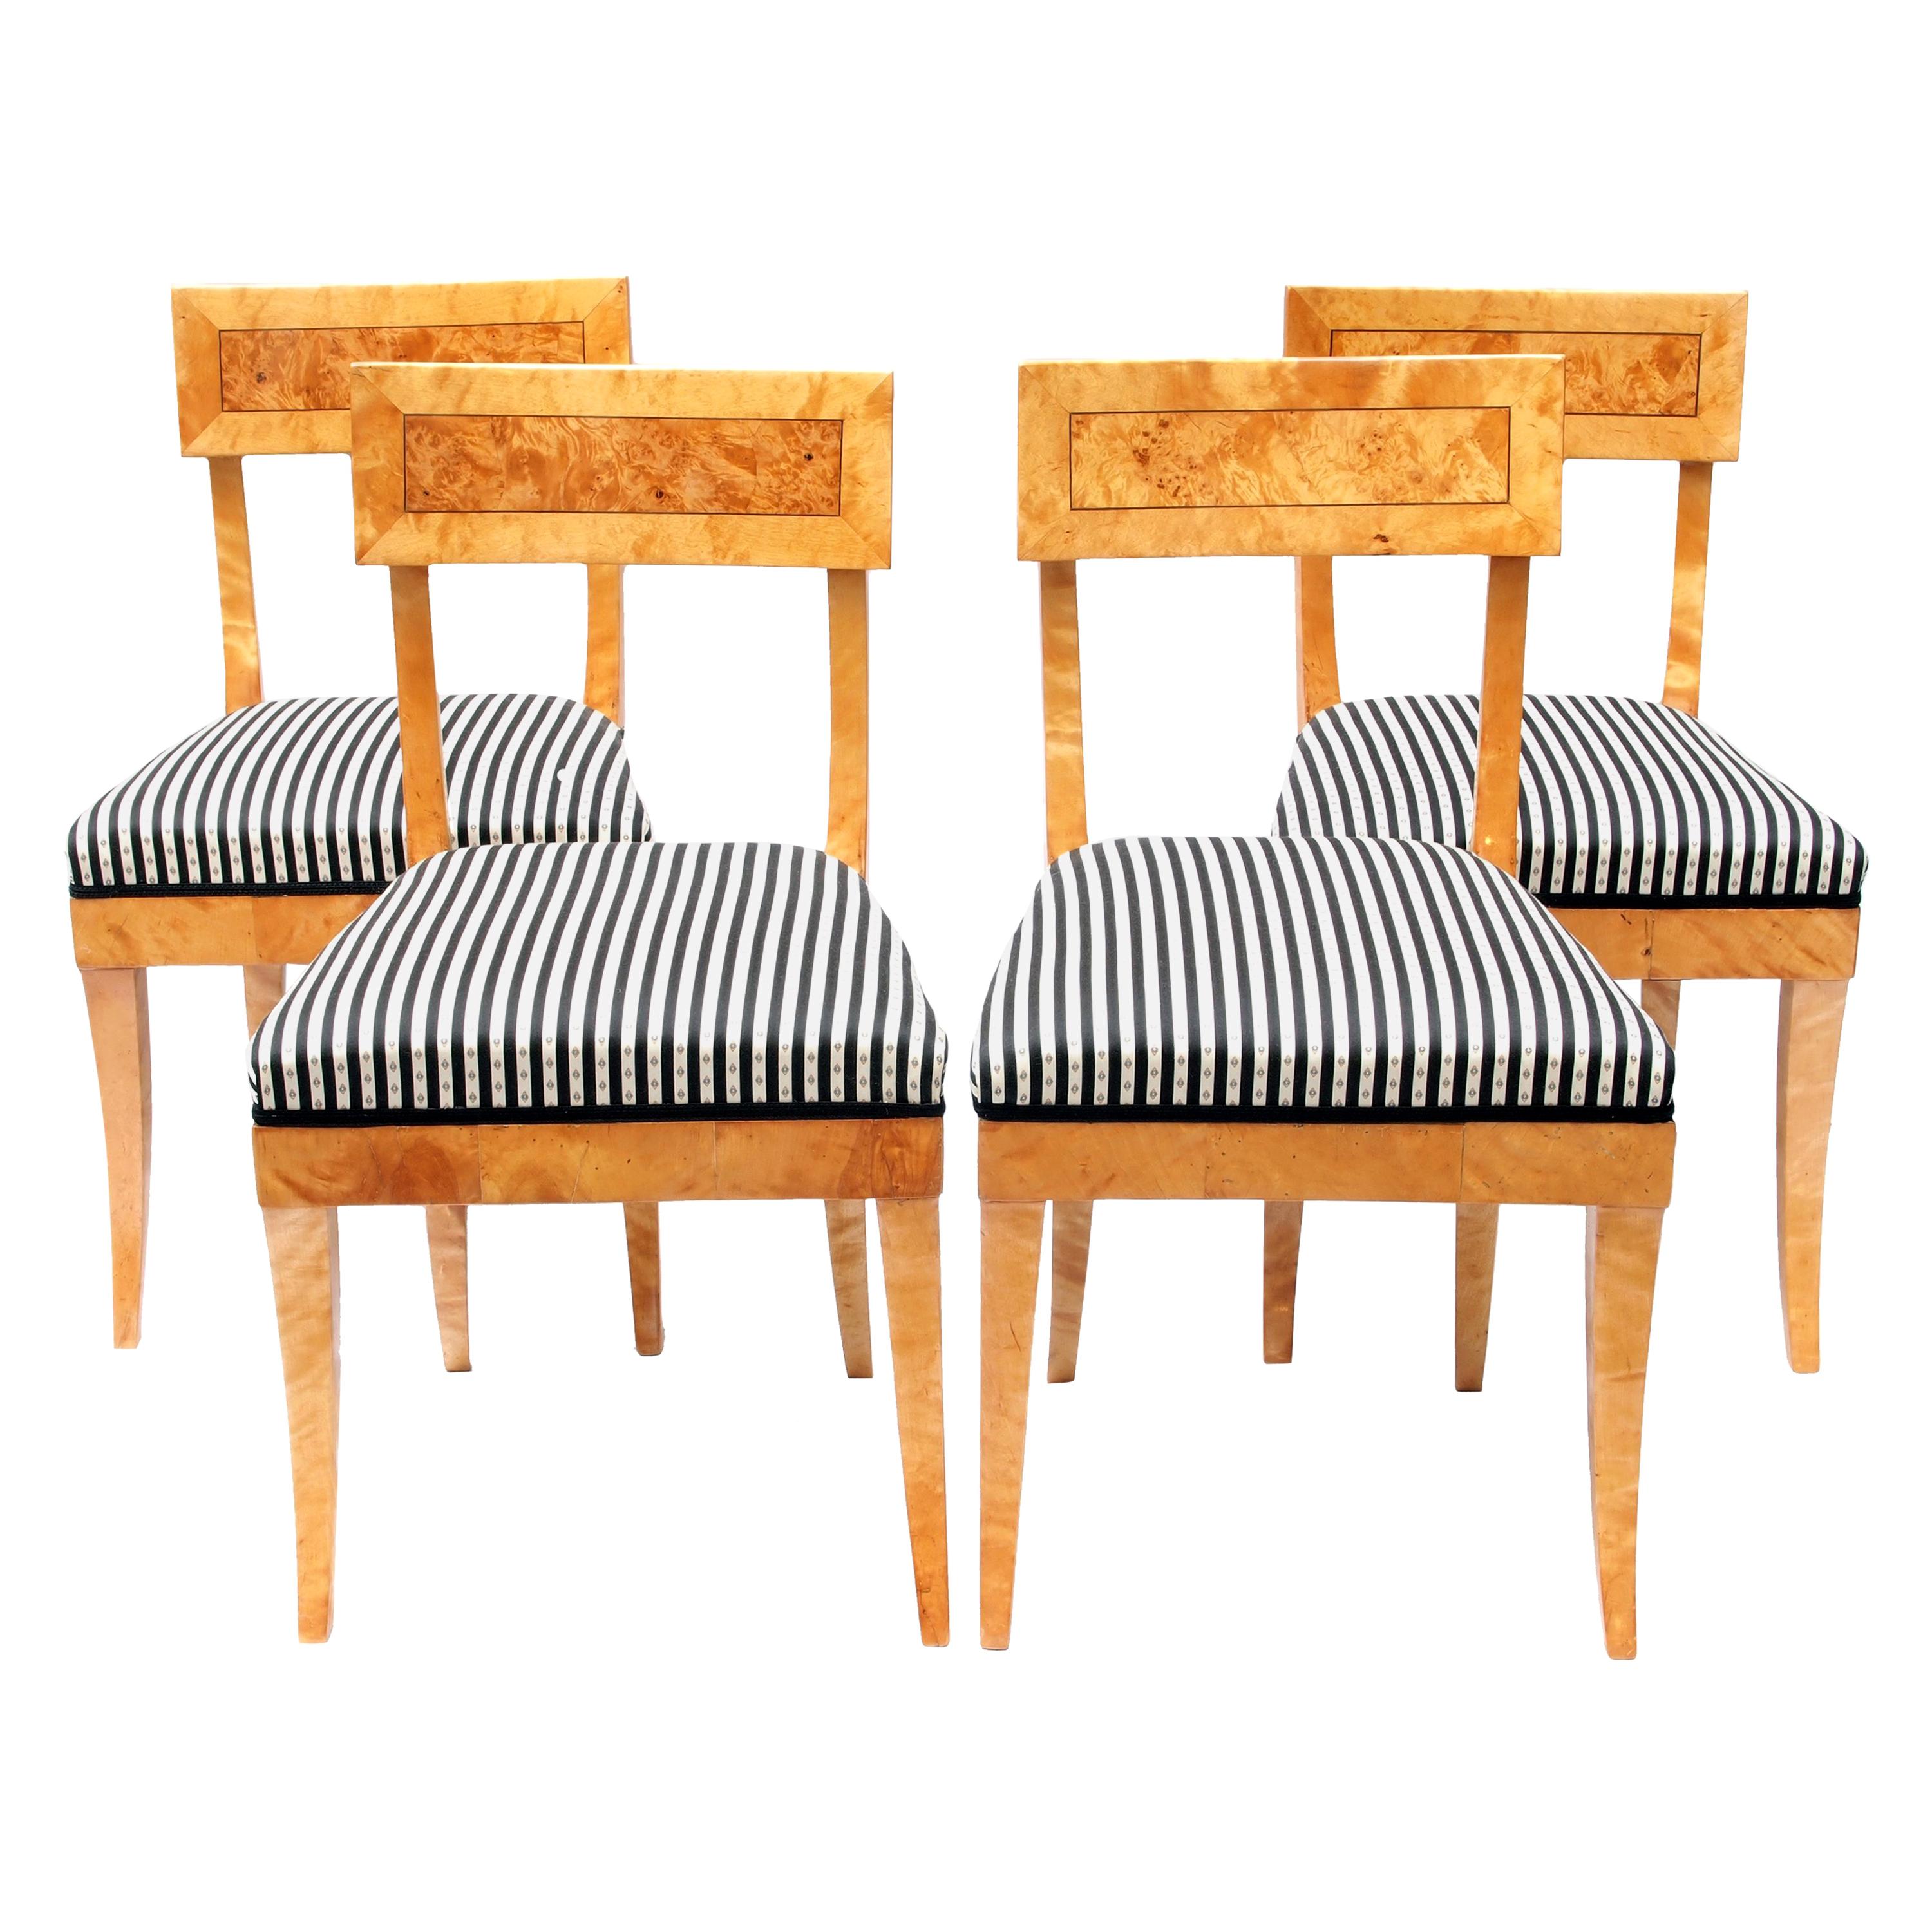 Early 19th Century Set of Four Biedermeier Birch Wood Chairs from Germany For Sale